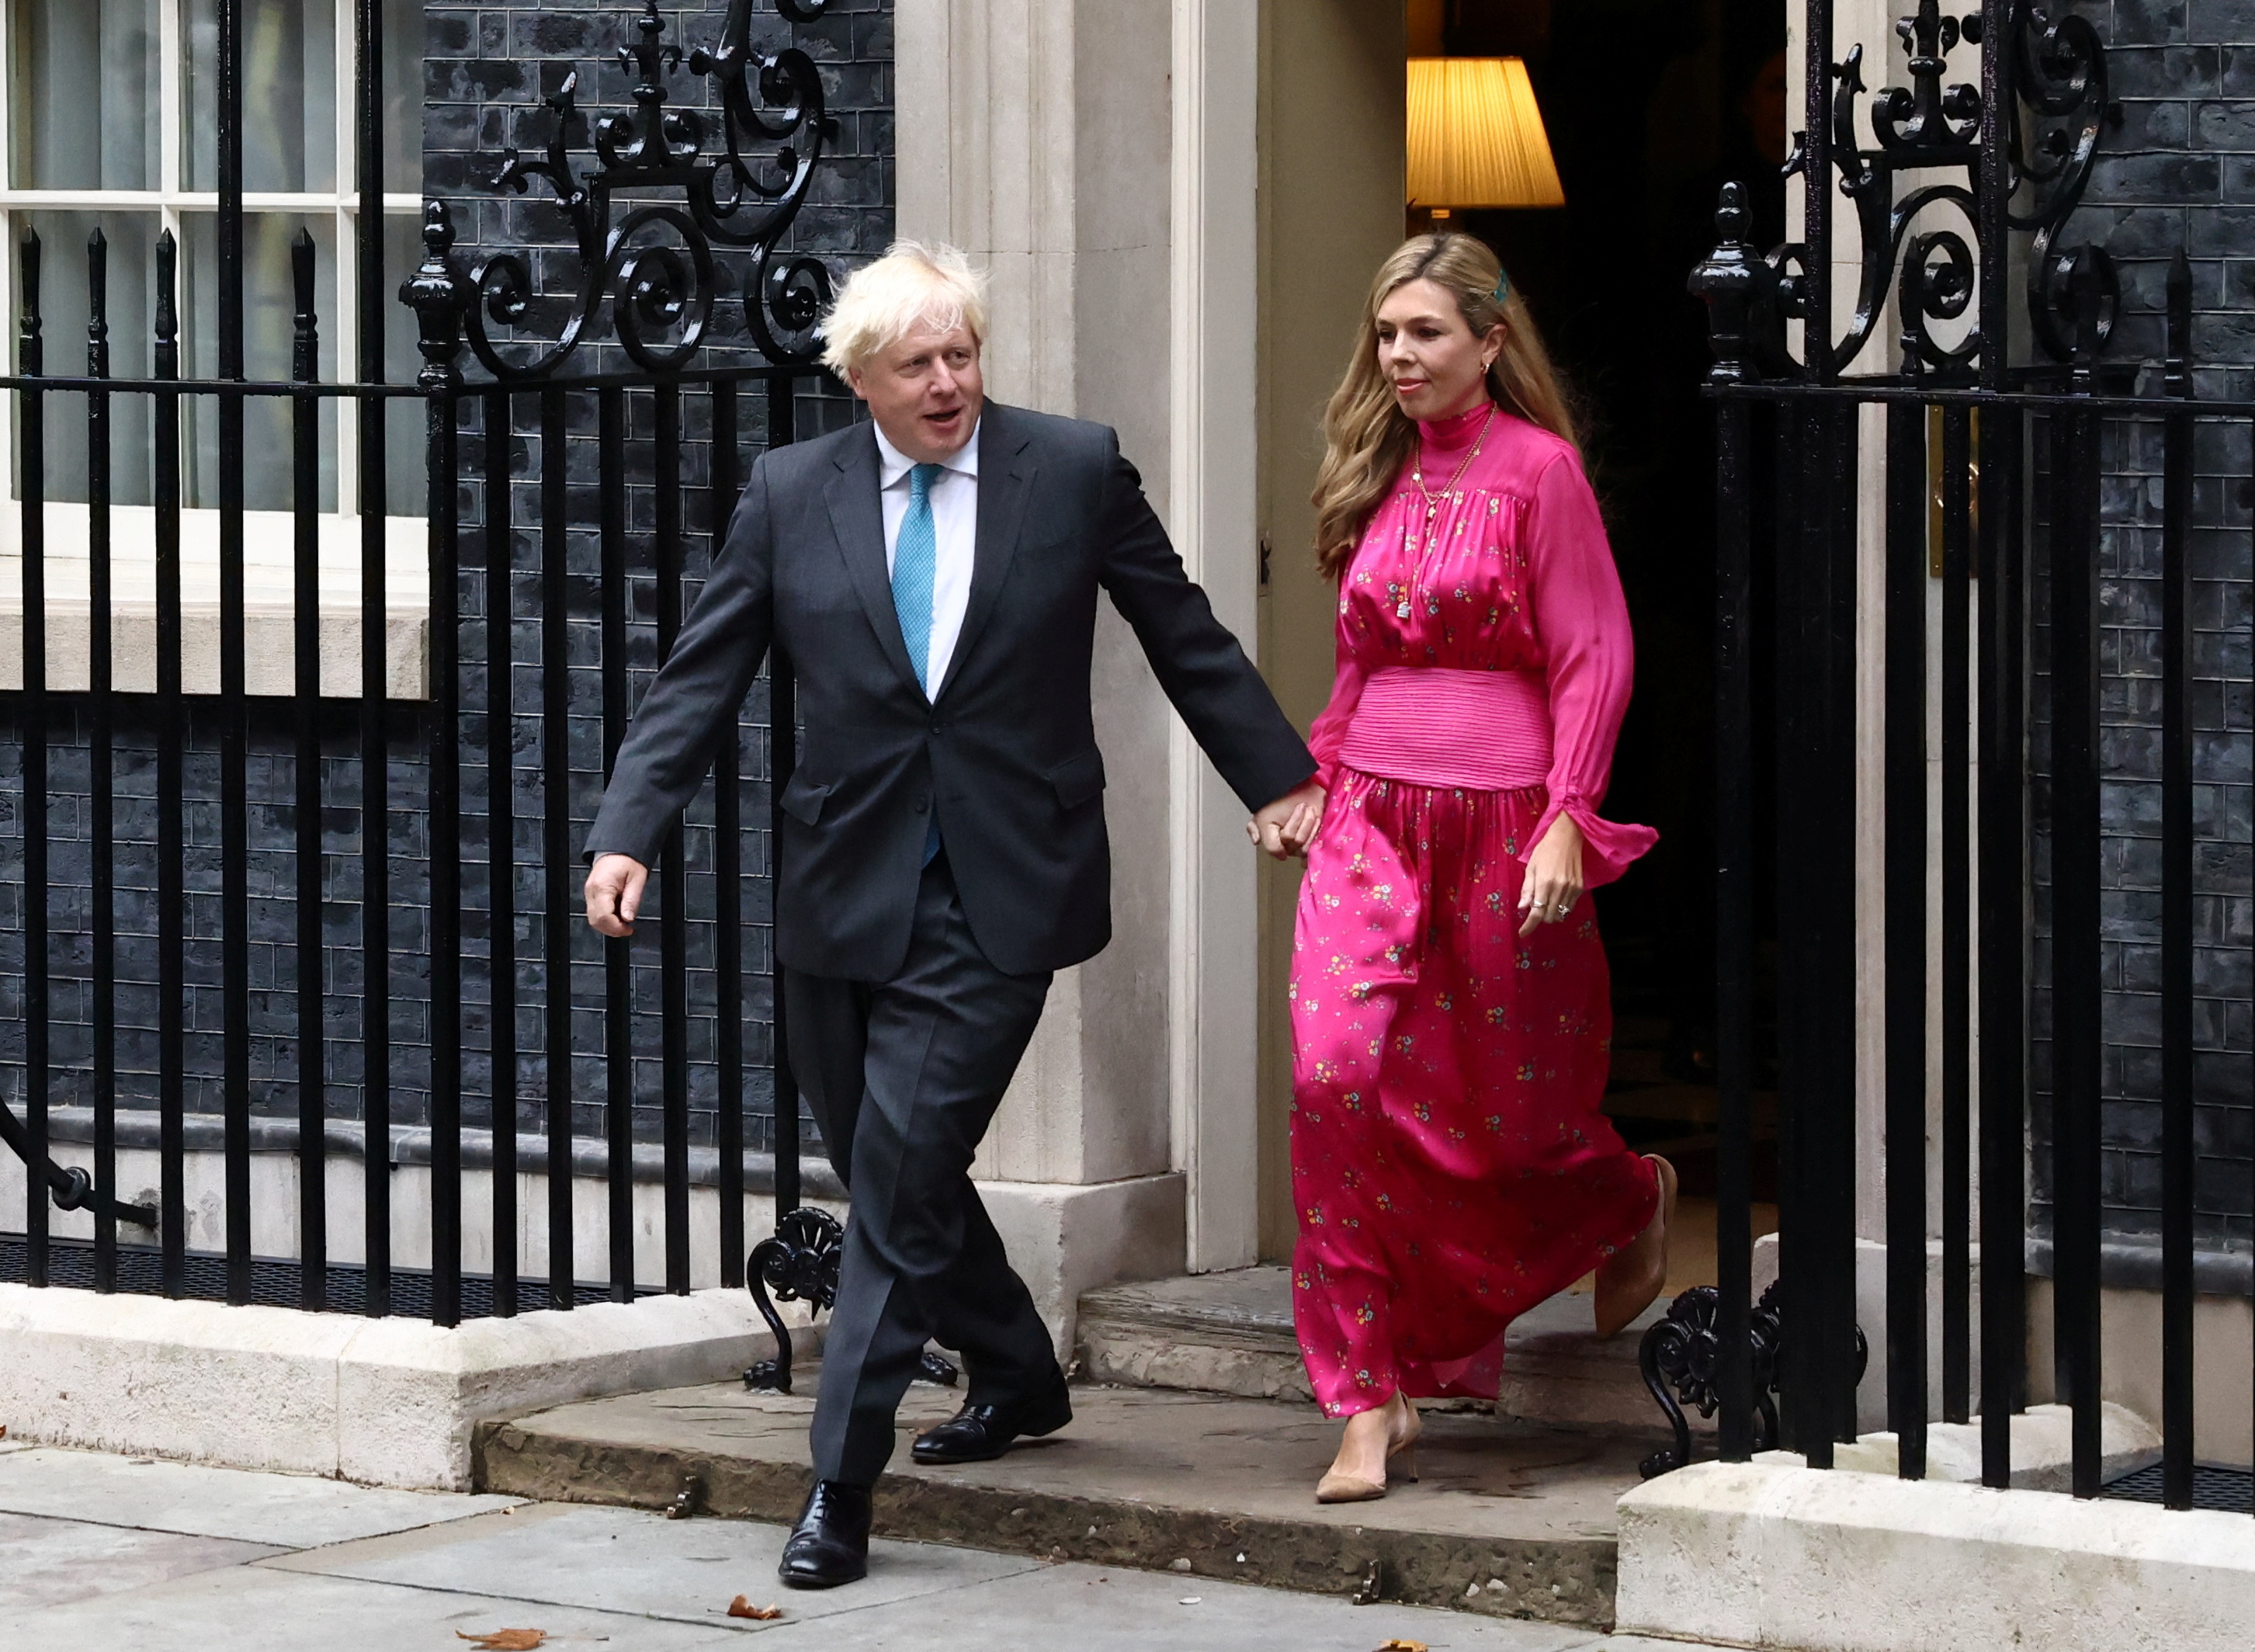 Boris Johnson Said Goodbye In The Company Of His Wife Carrie Johnson